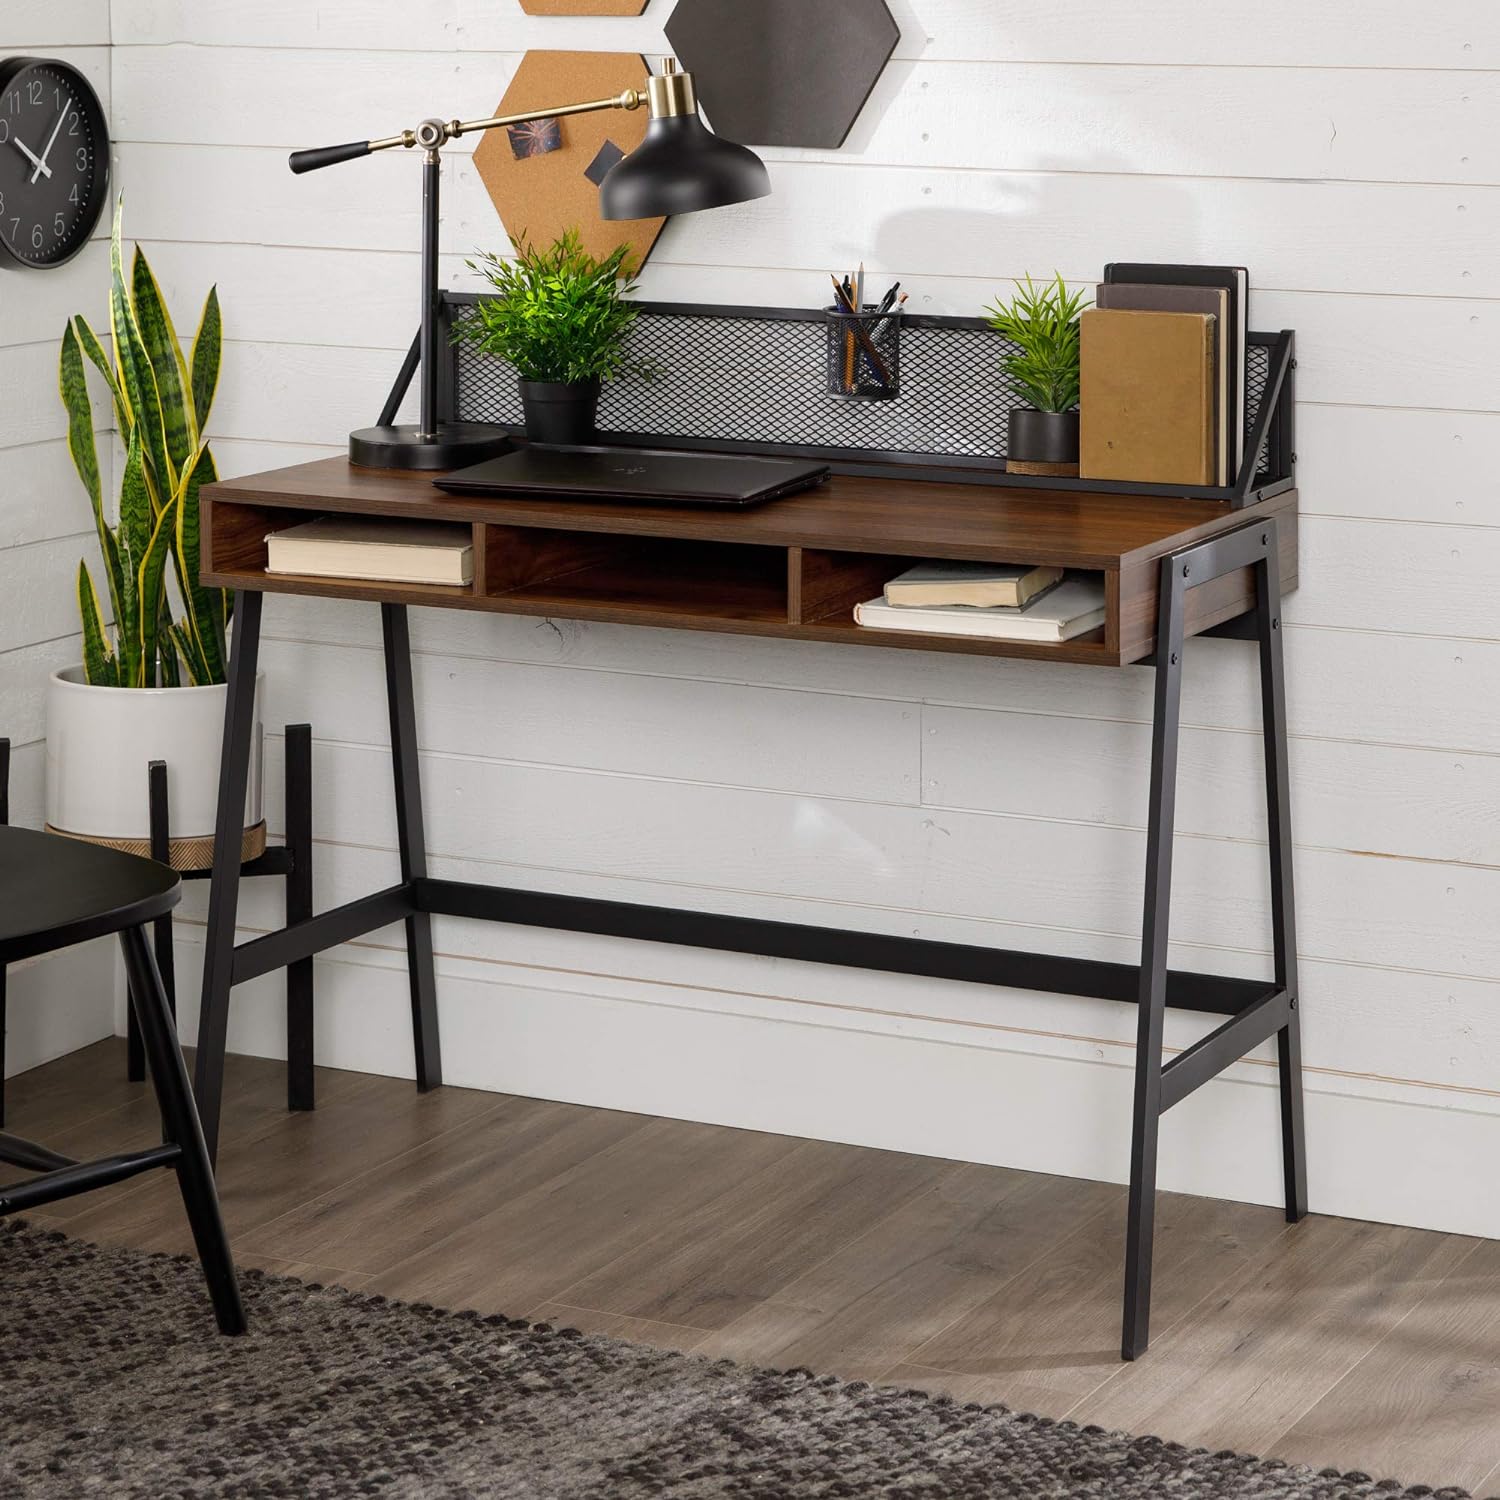 industrial small space desk with black metal mesh backing panel and walnut wood tabletop with built in cubbies 43 inch width desk for small WFH setup ideas and inspiration